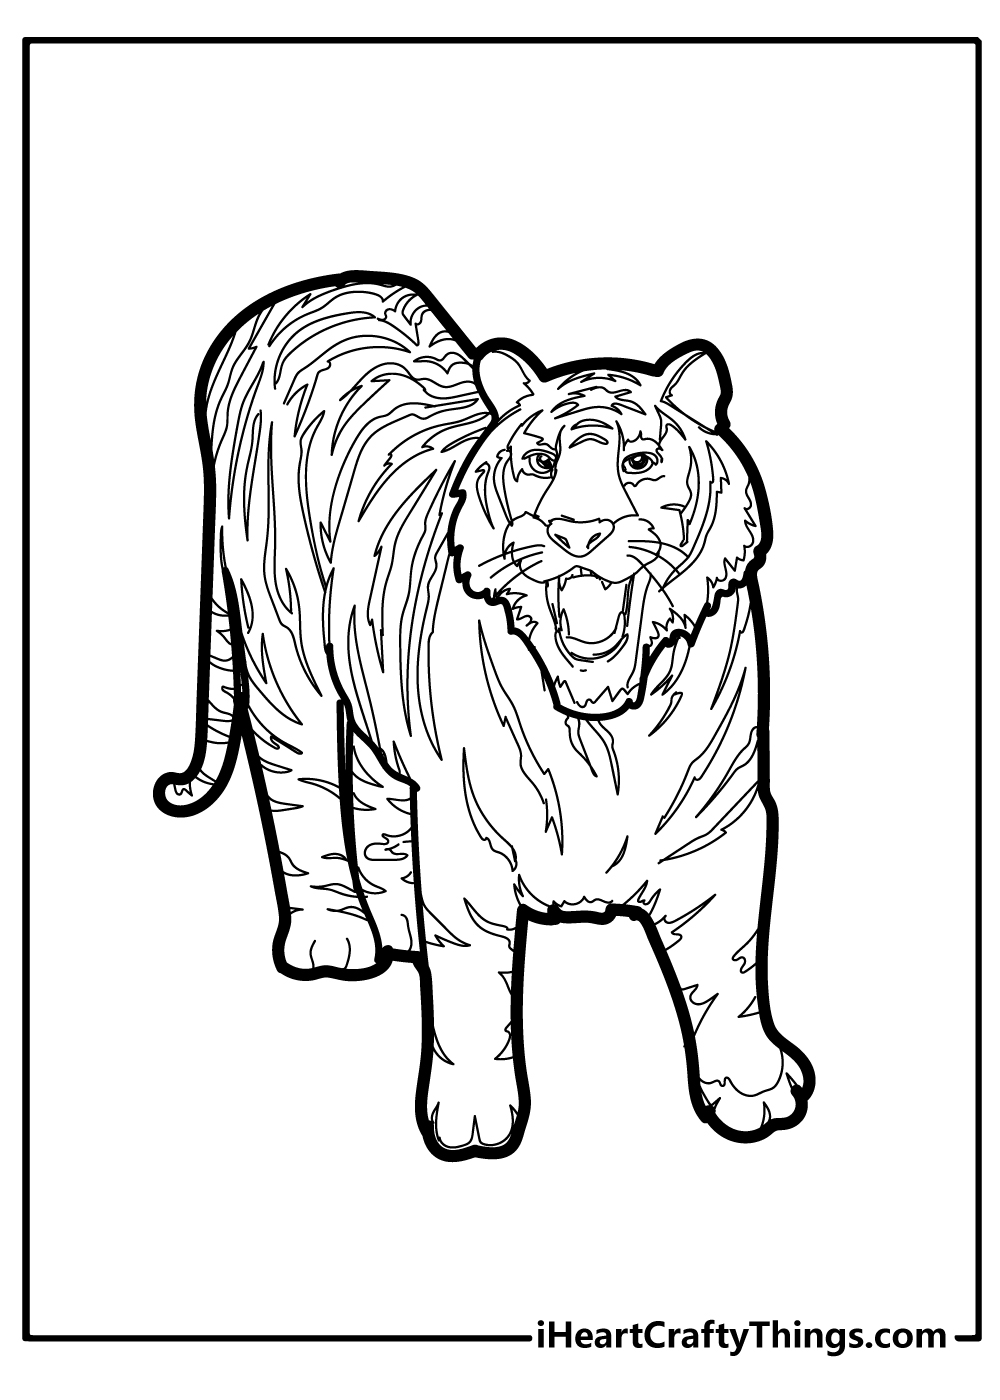 Tiger Coloring Pages free pdf download